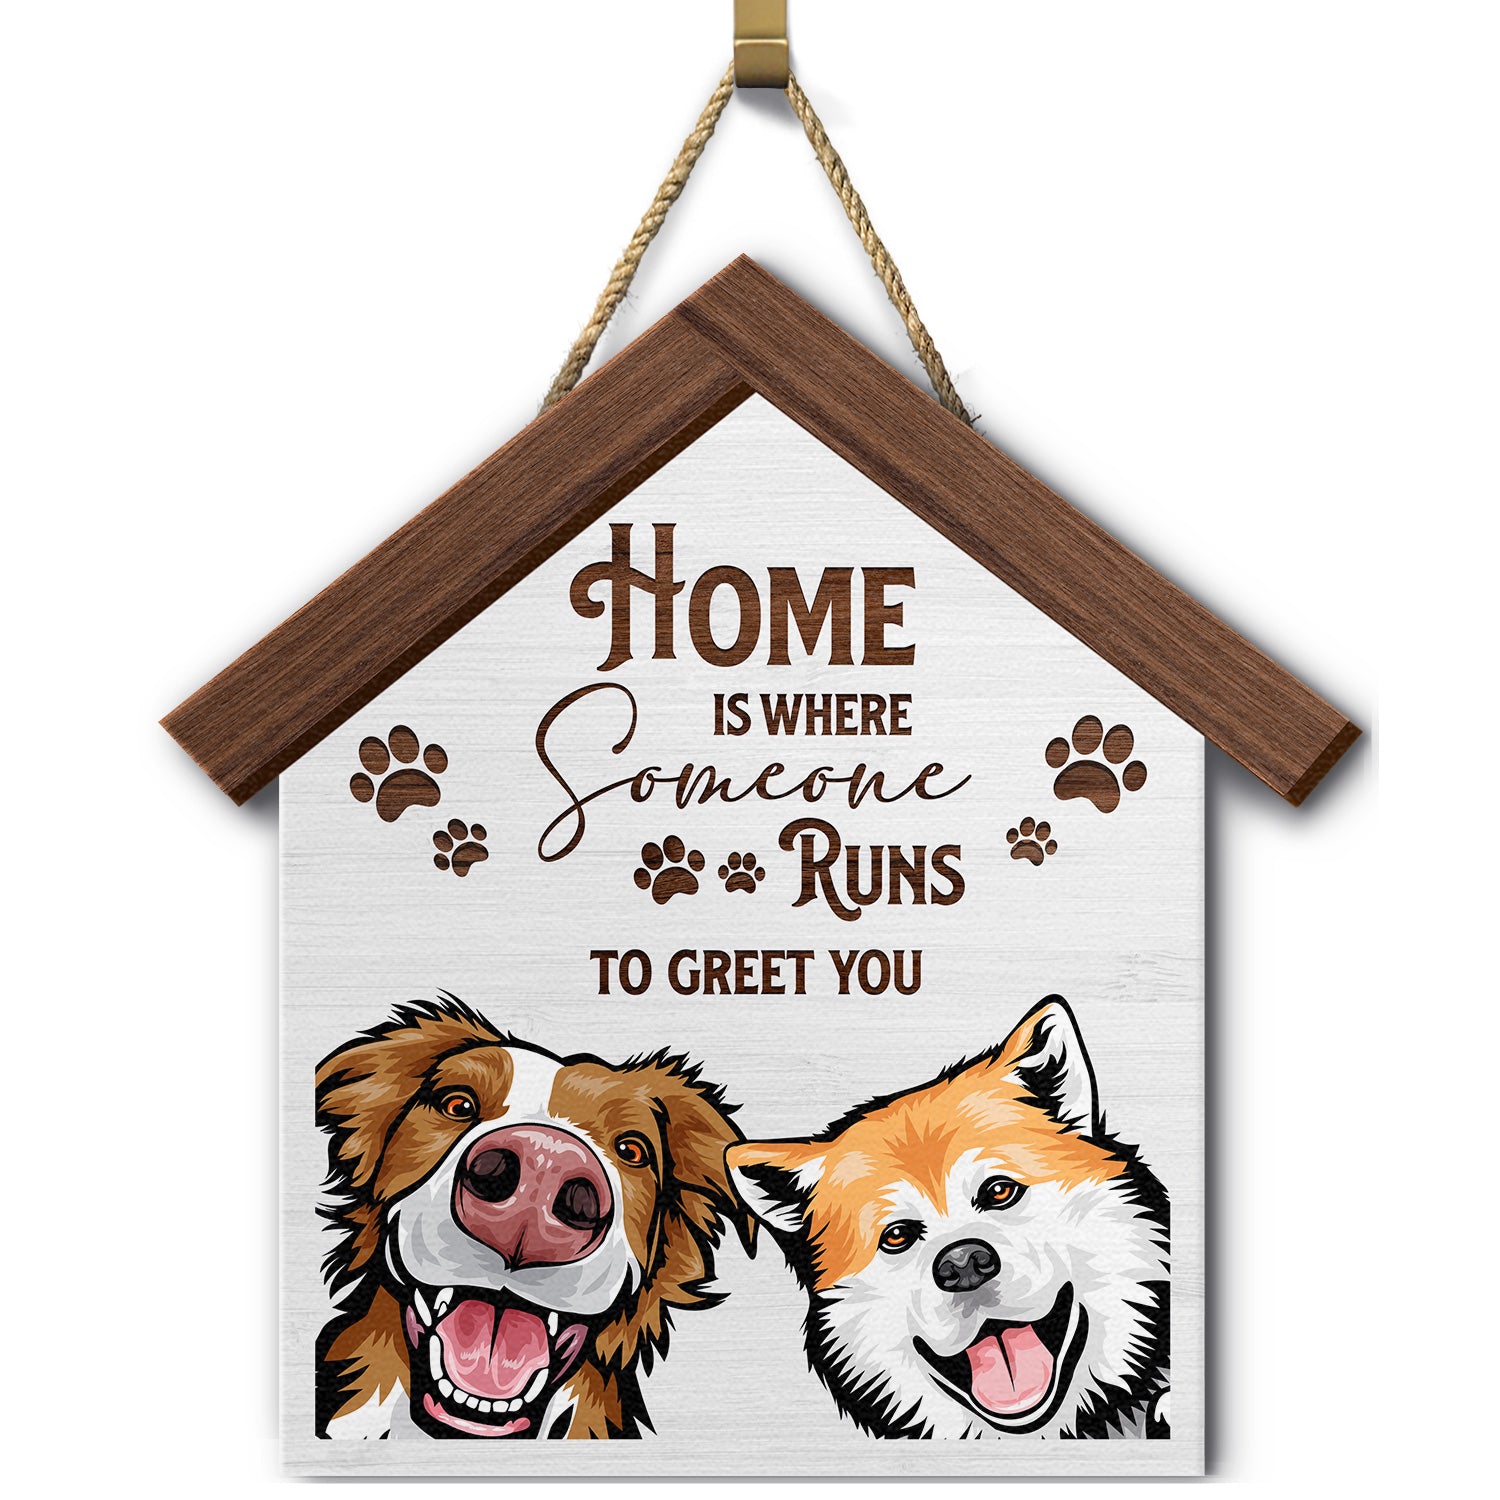 Home Is Where Someone Runs To Greet You - Birthday, Decor Gift For Dog Lovers, Dog Moms, Dog Dads, Pet Lovers - Personalized Custom Shaped Wood Sign